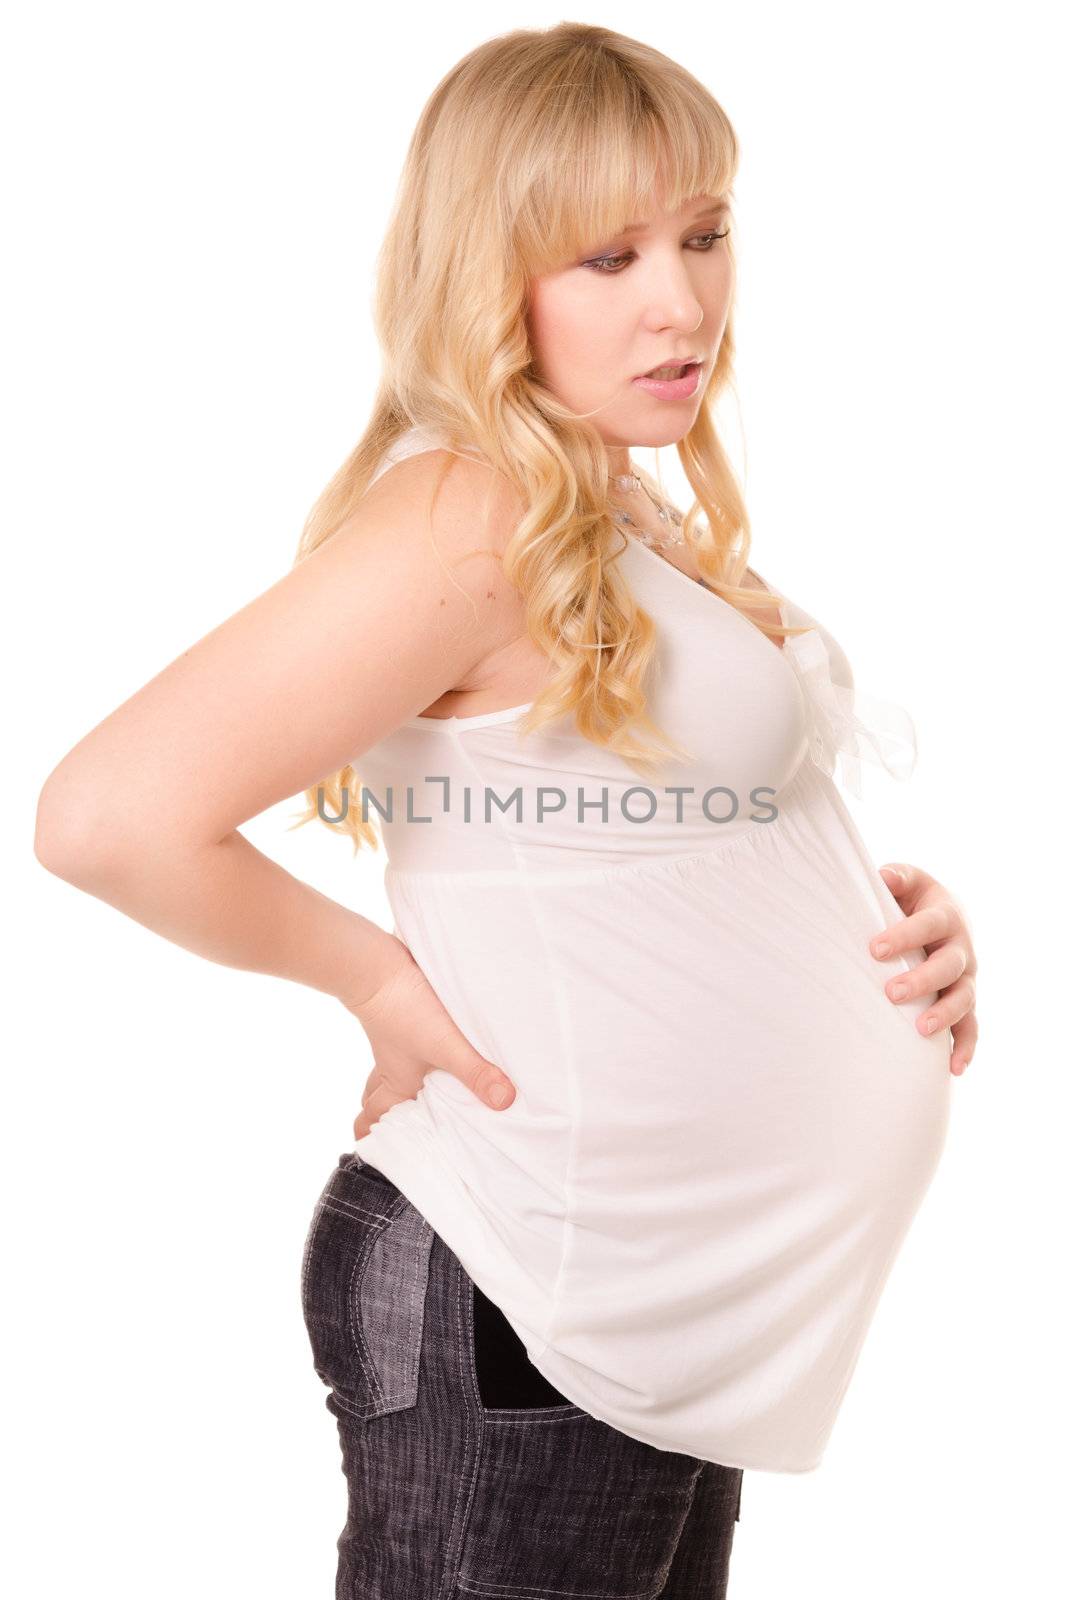 Pregnant woman feels discomfort in back, isolated on white background